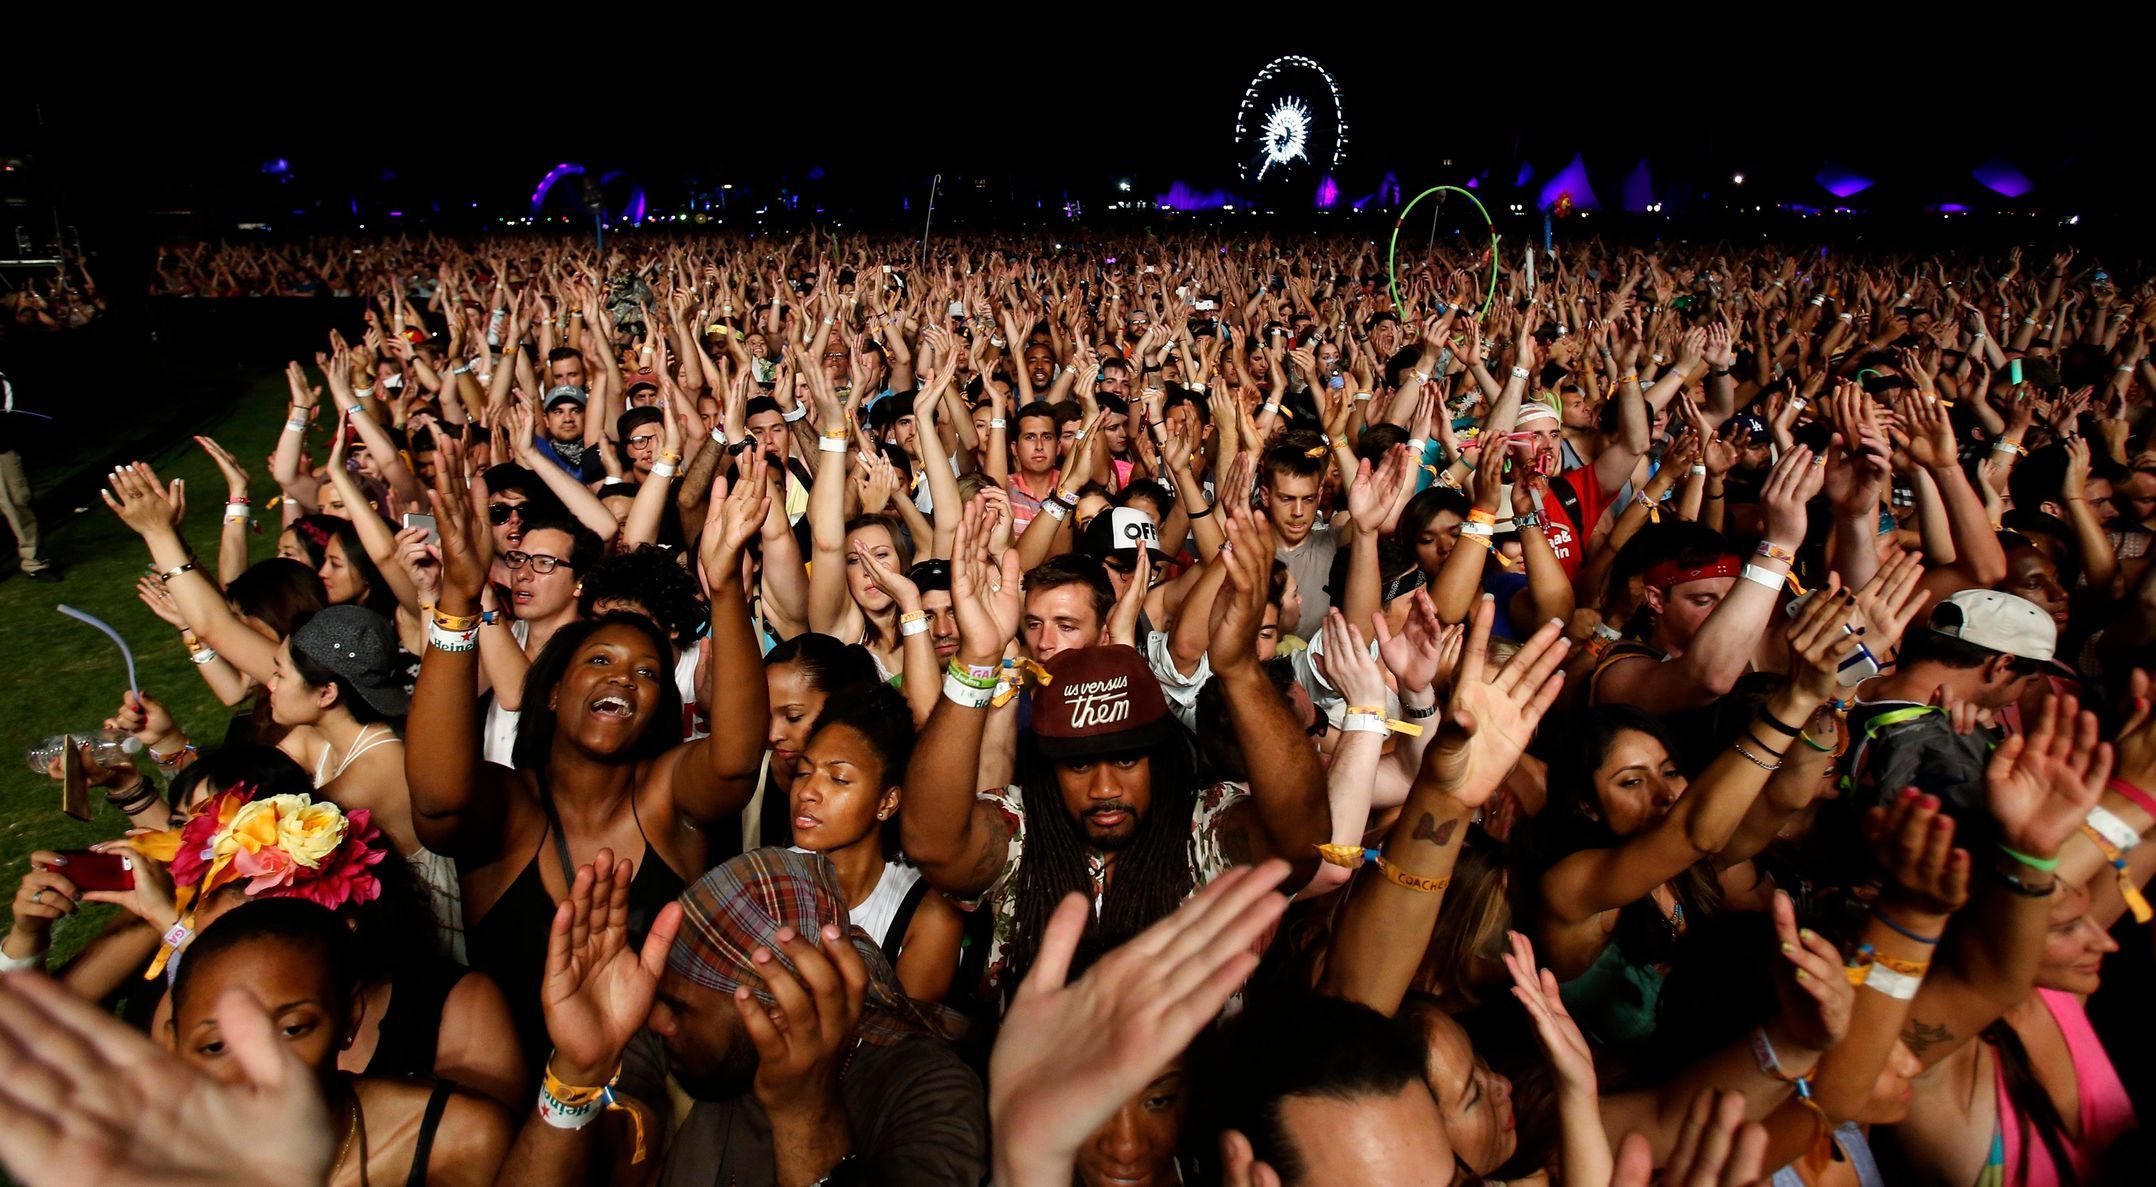 Concert-goers cheer during the performance of Canadian electrofunk duo Chromeo at the Coachella Valley Music and Arts Festival in Indio, California